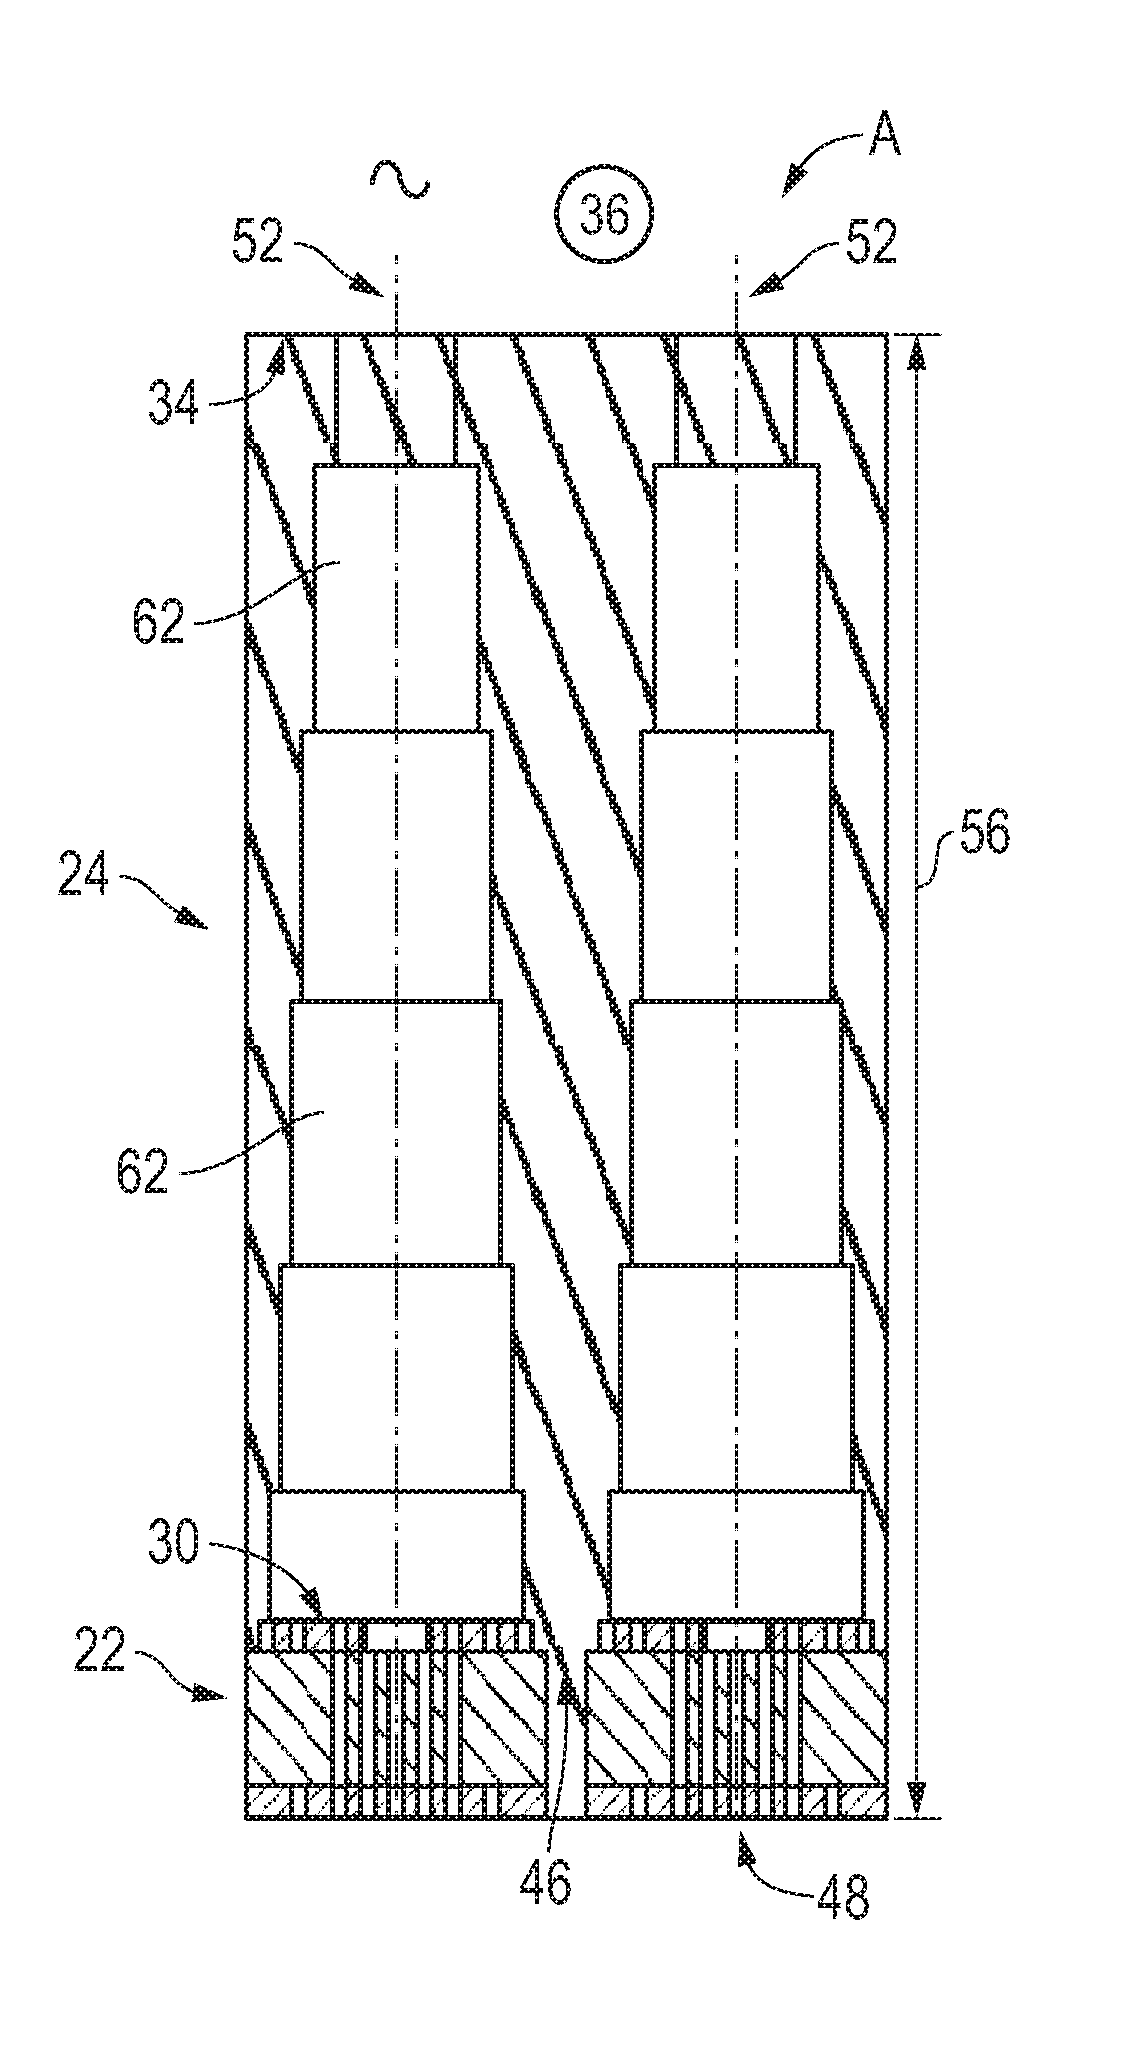 Wideband wide scan antenna matching structure using electrically floating plates